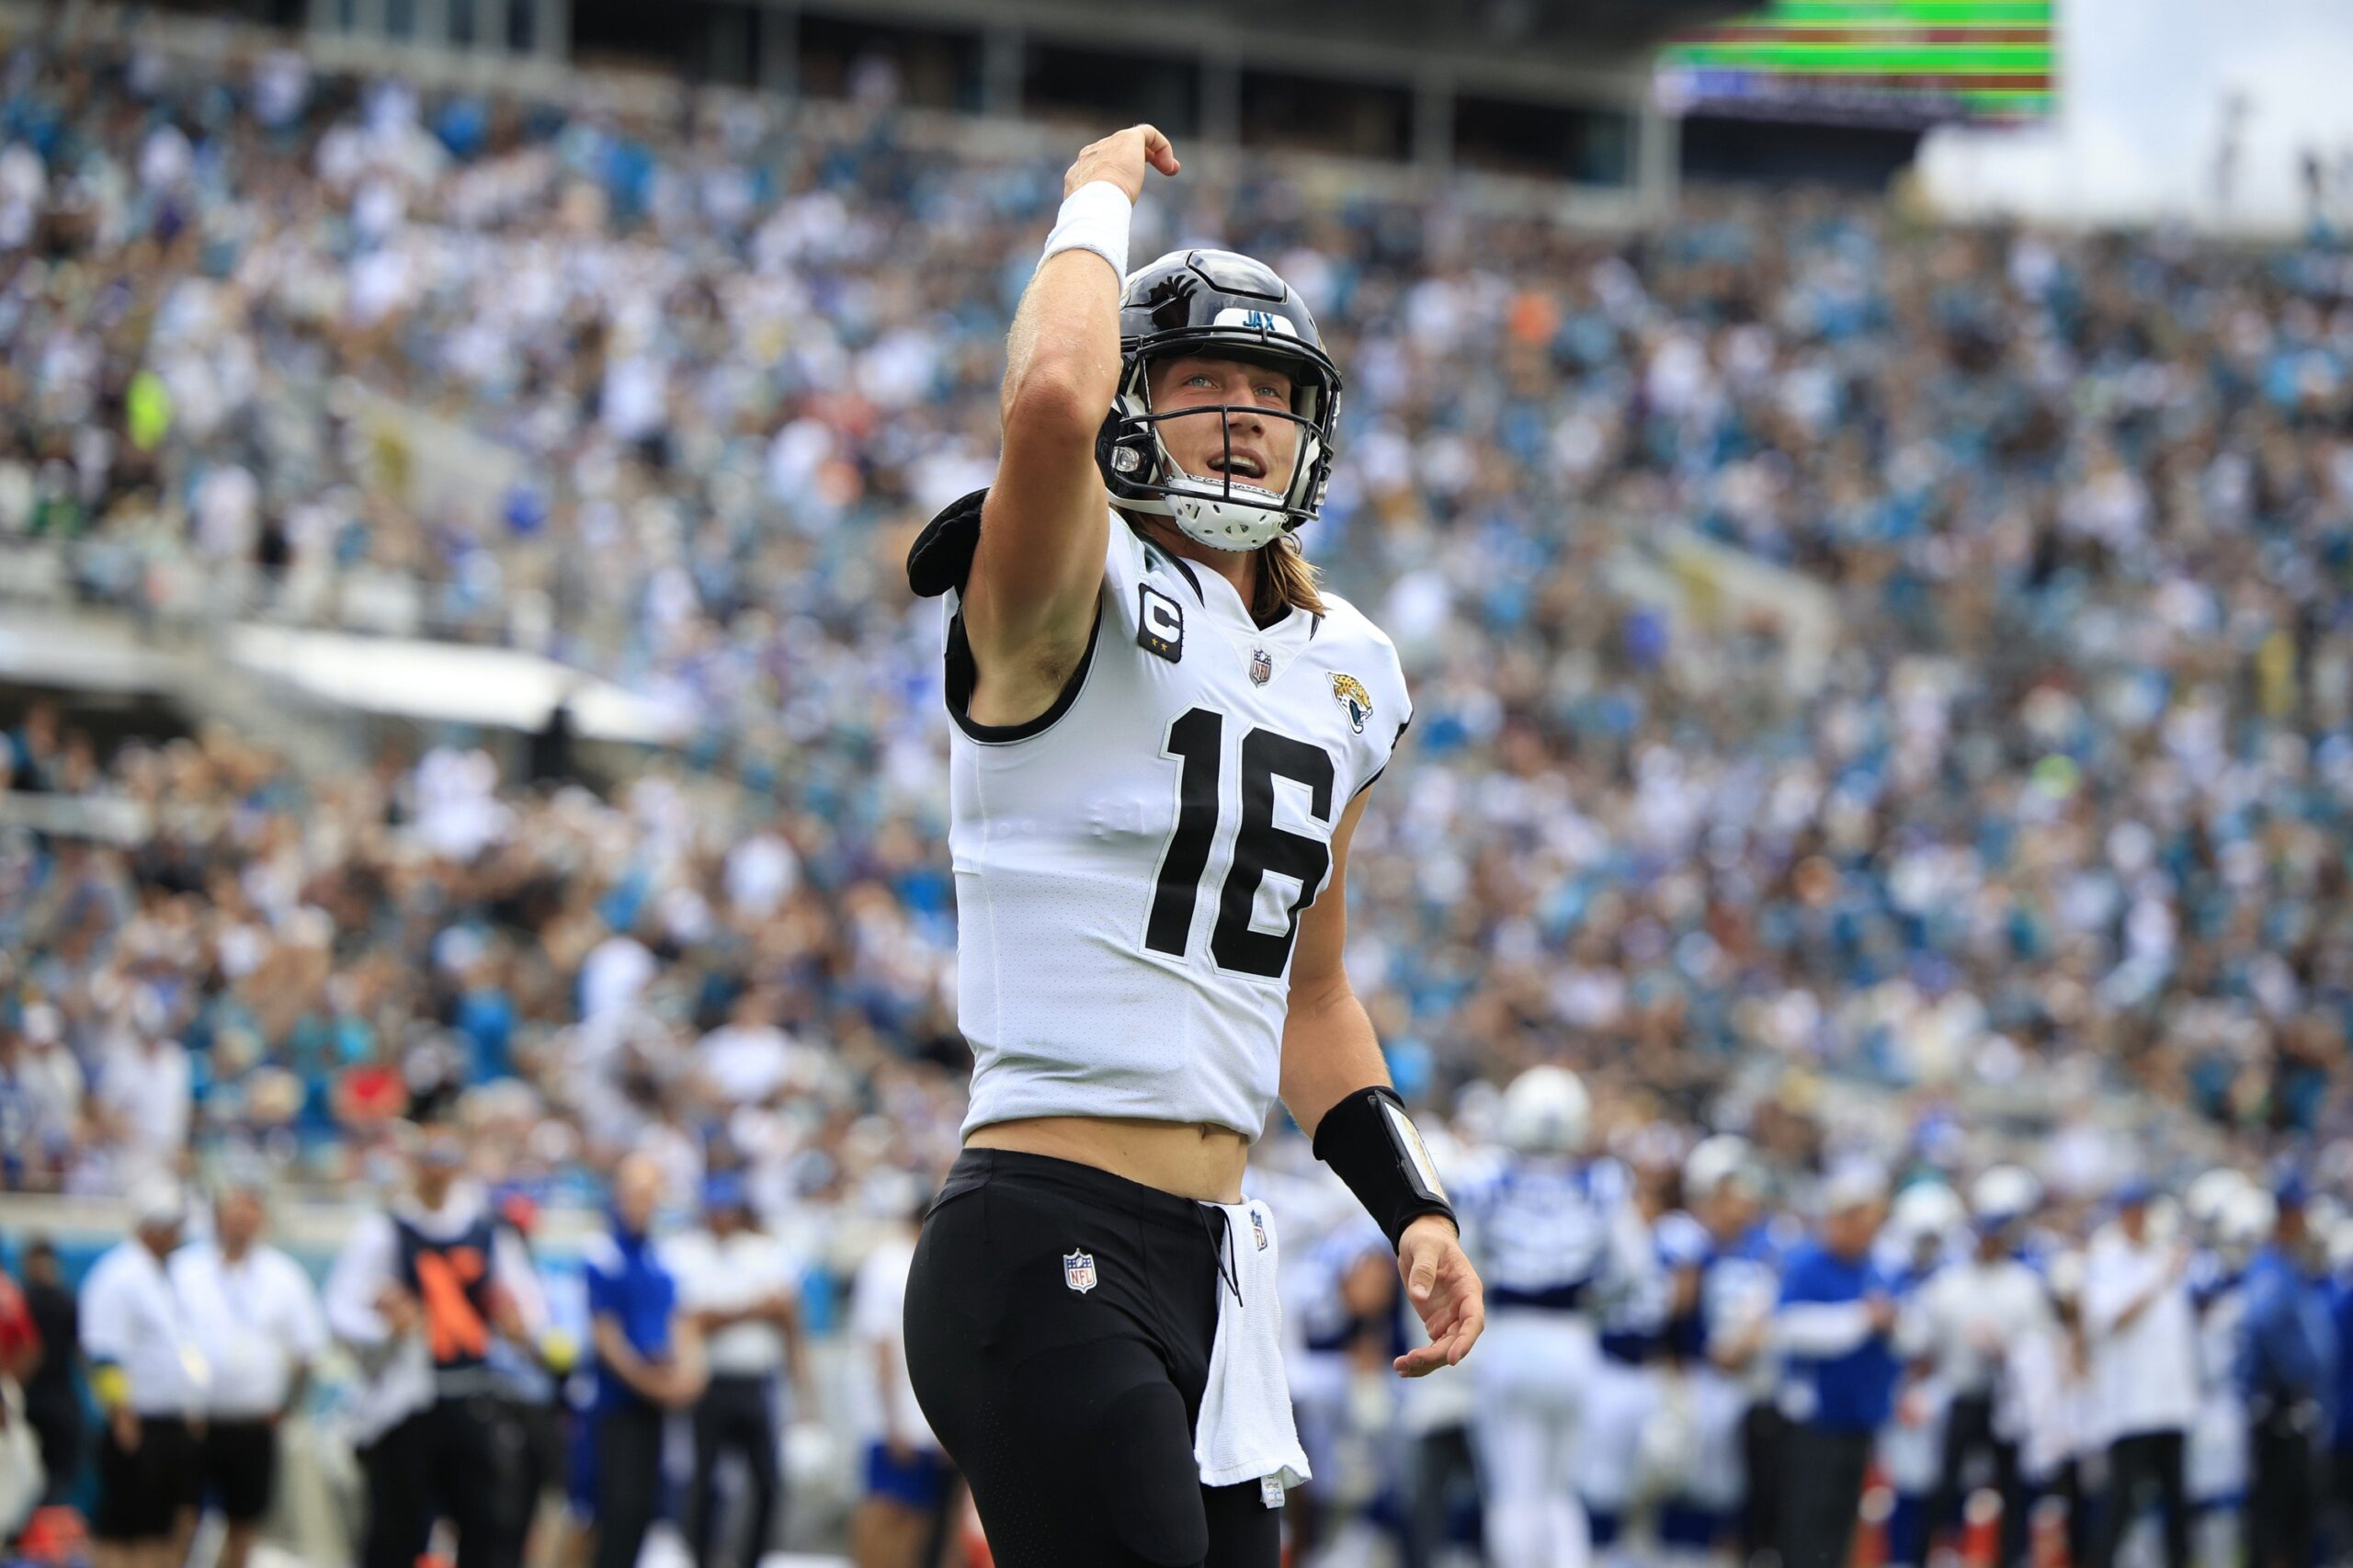 Trevor Lawrence (16) pumps up the crowd after throwing a touchdown pass during the third quarter Sunday, Sept. 18, 2022 at TIAA Bank Field in Jacksonville.